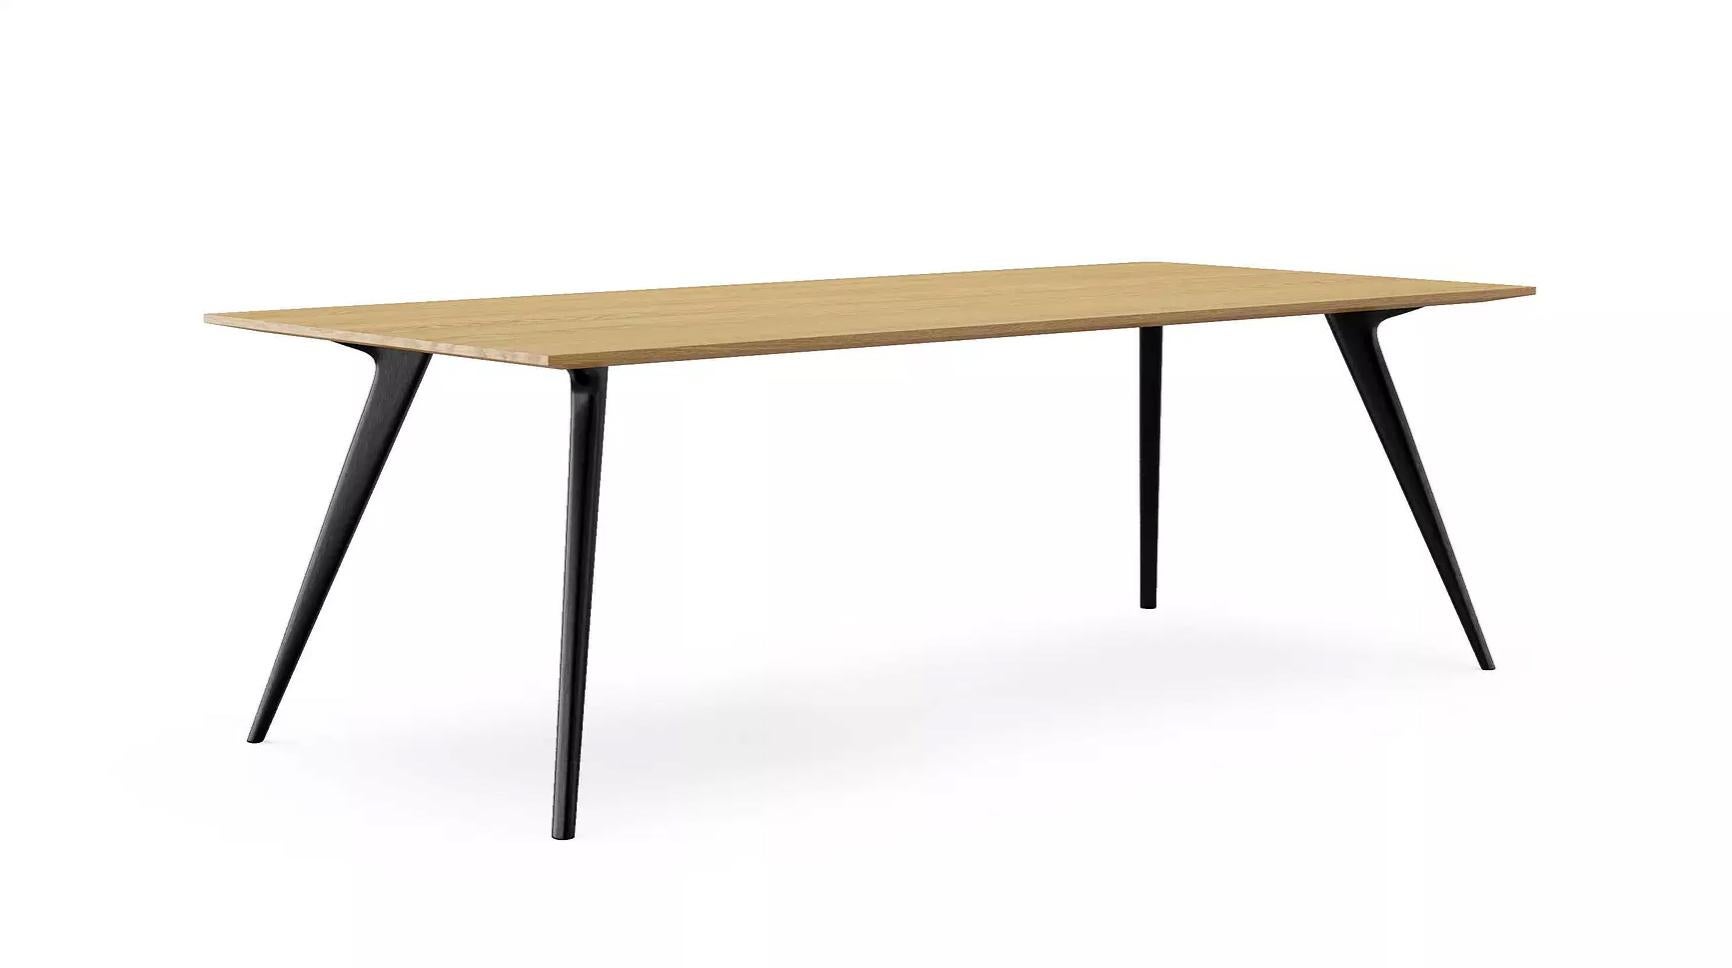 Waldron dining table by Dare Studio, 2015
Dimensions: H 73 cm, D 100 cm, W 220 cm
Materials: European white oak, aluminium

Also available in American walnut and in waxed oil timber finish.

Dare Studio is a British design company producing